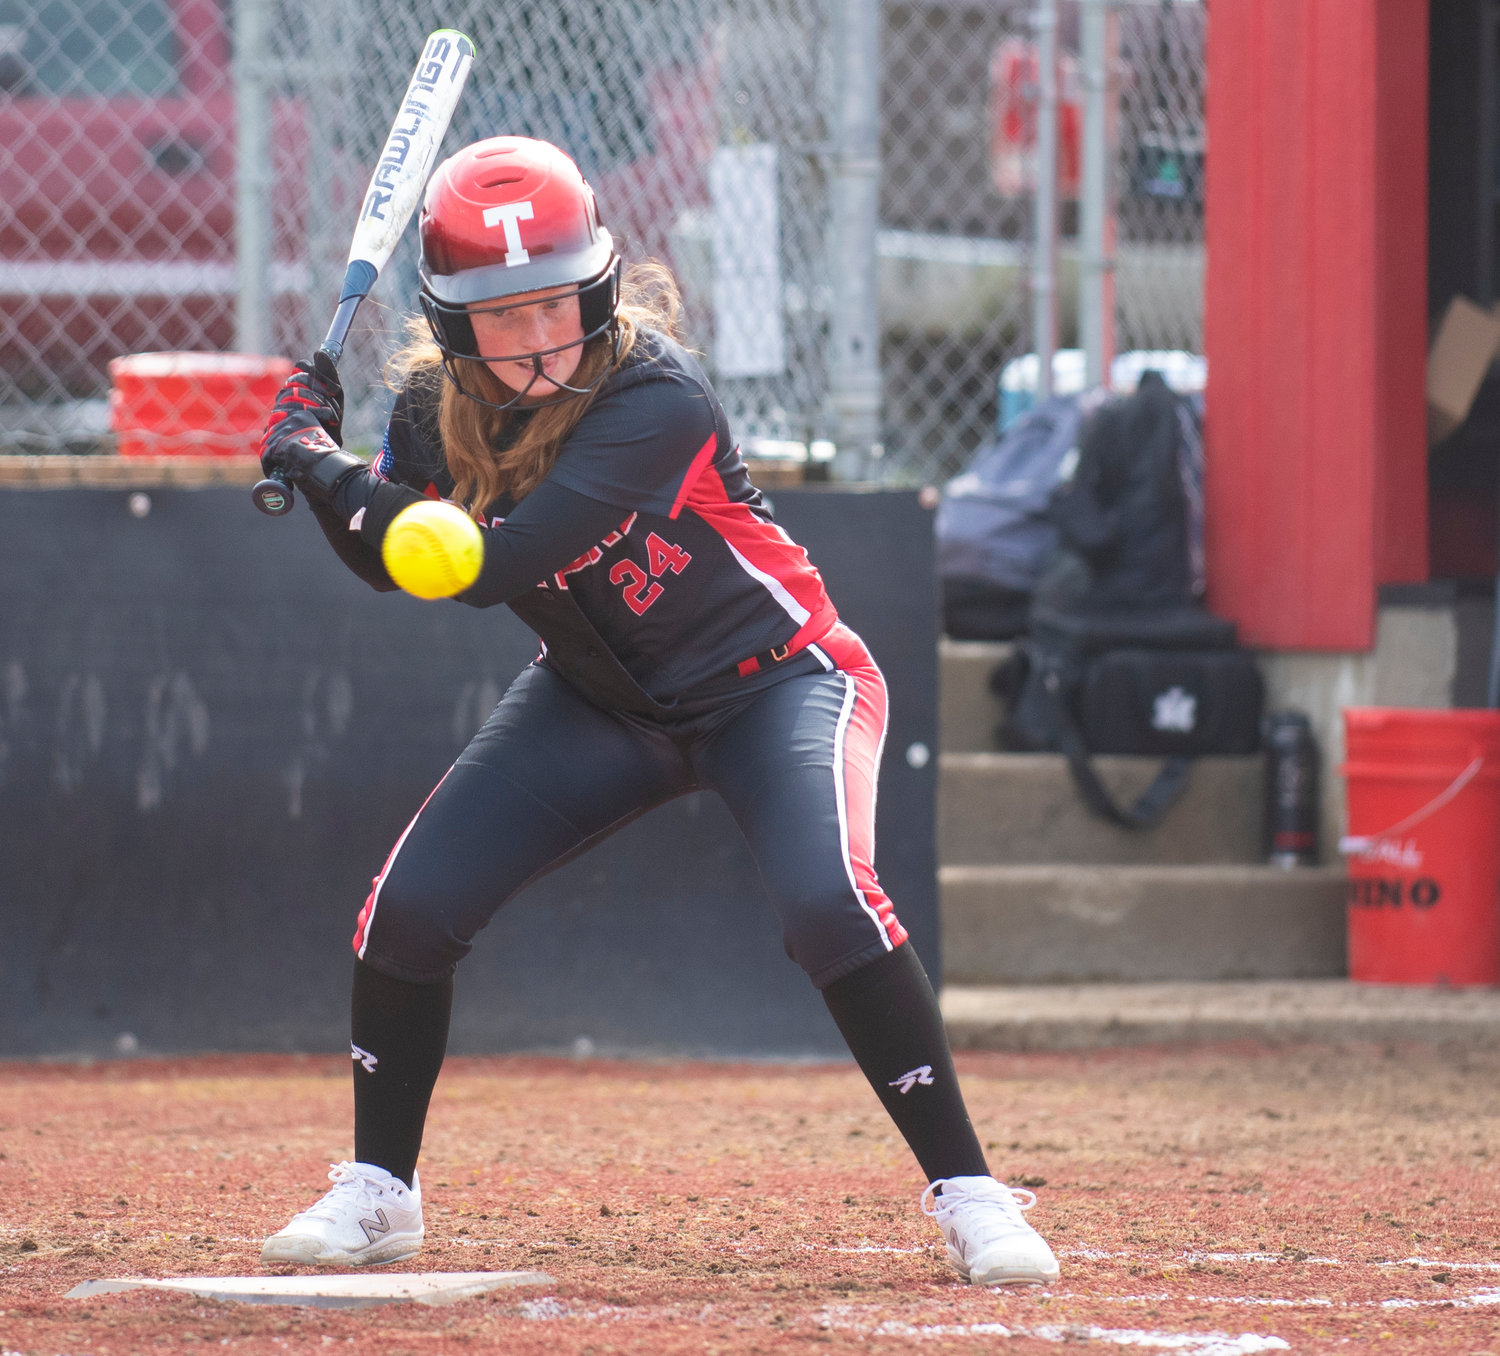 Tenino leadoff hitter and center fielder Abby Severse watches a ball go by on Friday.